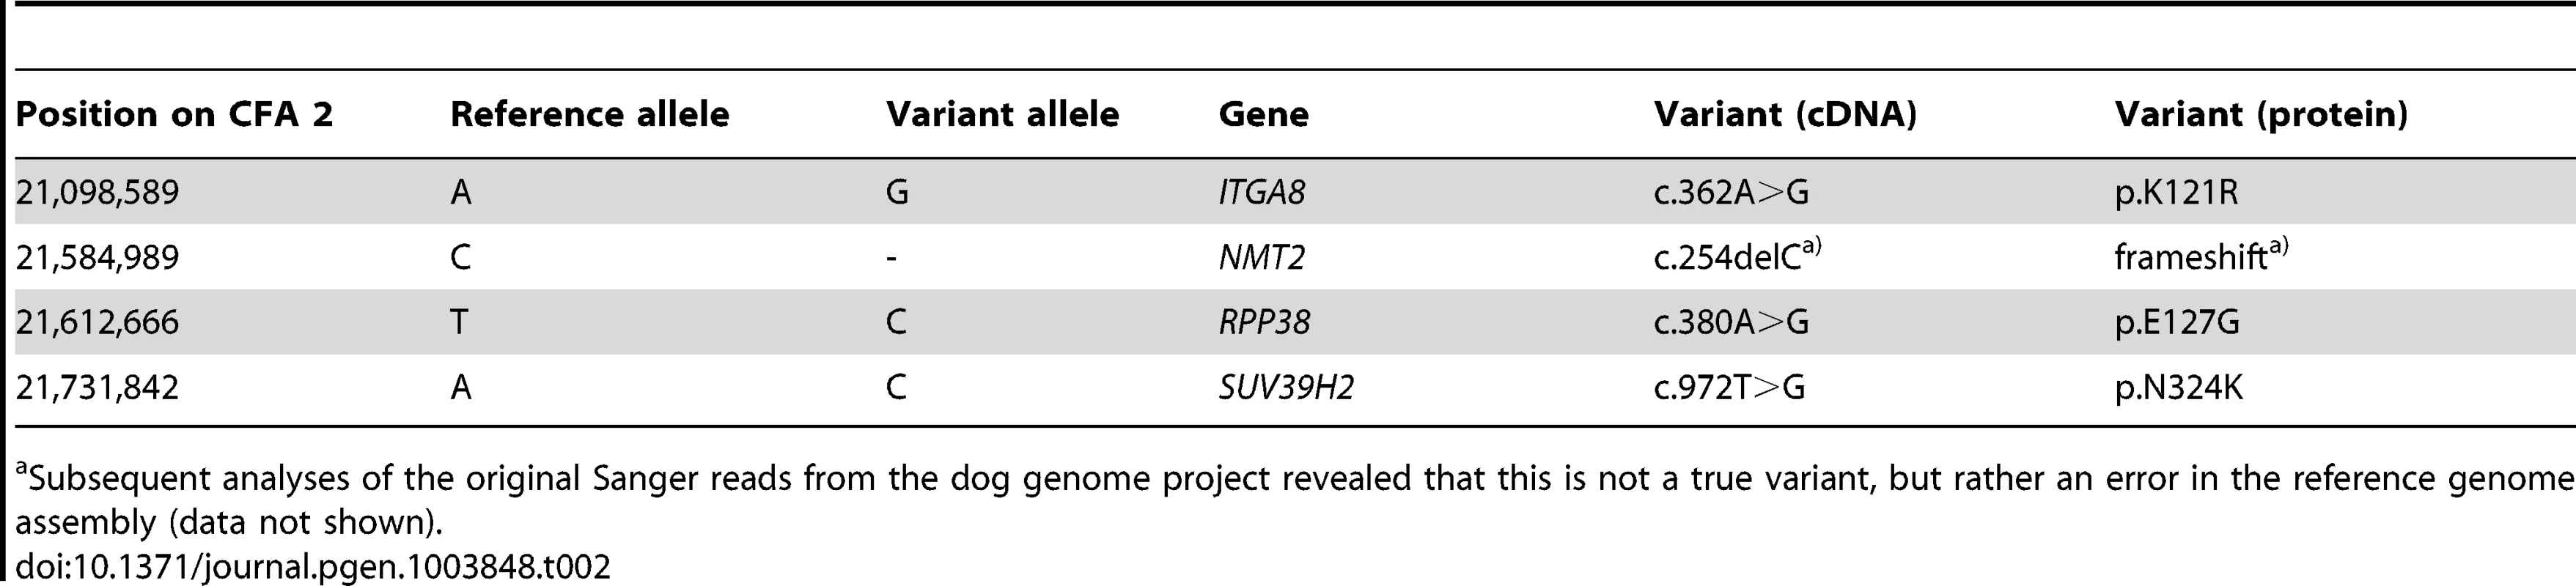 Four non-synonymous variants in the critical interval of an HNPK affected Labrador Retriever with respect to the Boxer reference genome (CanFam 3.1).